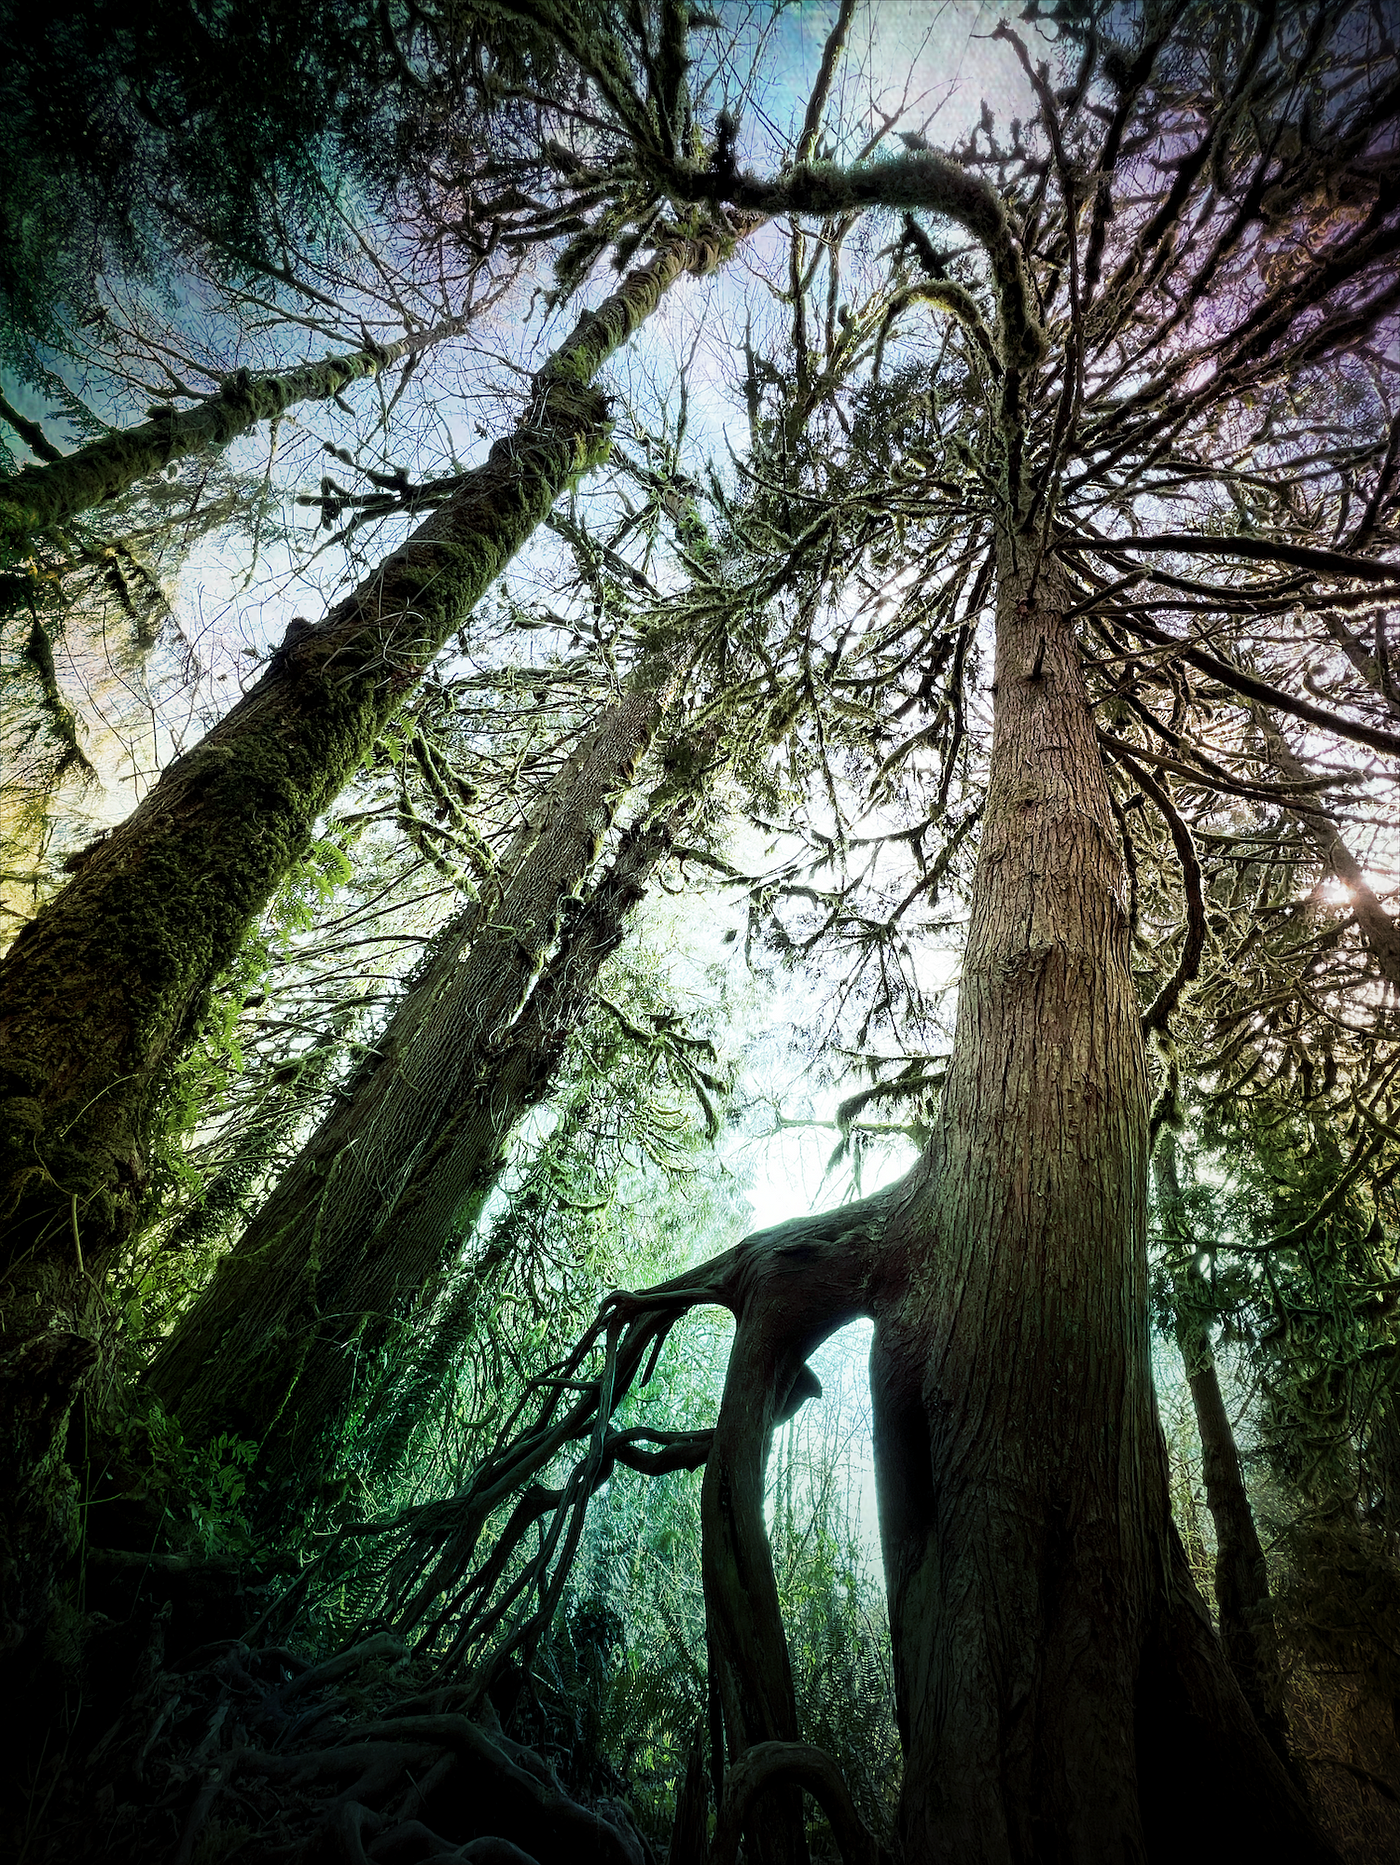 A cedar tree with roots high above the floor of the forest